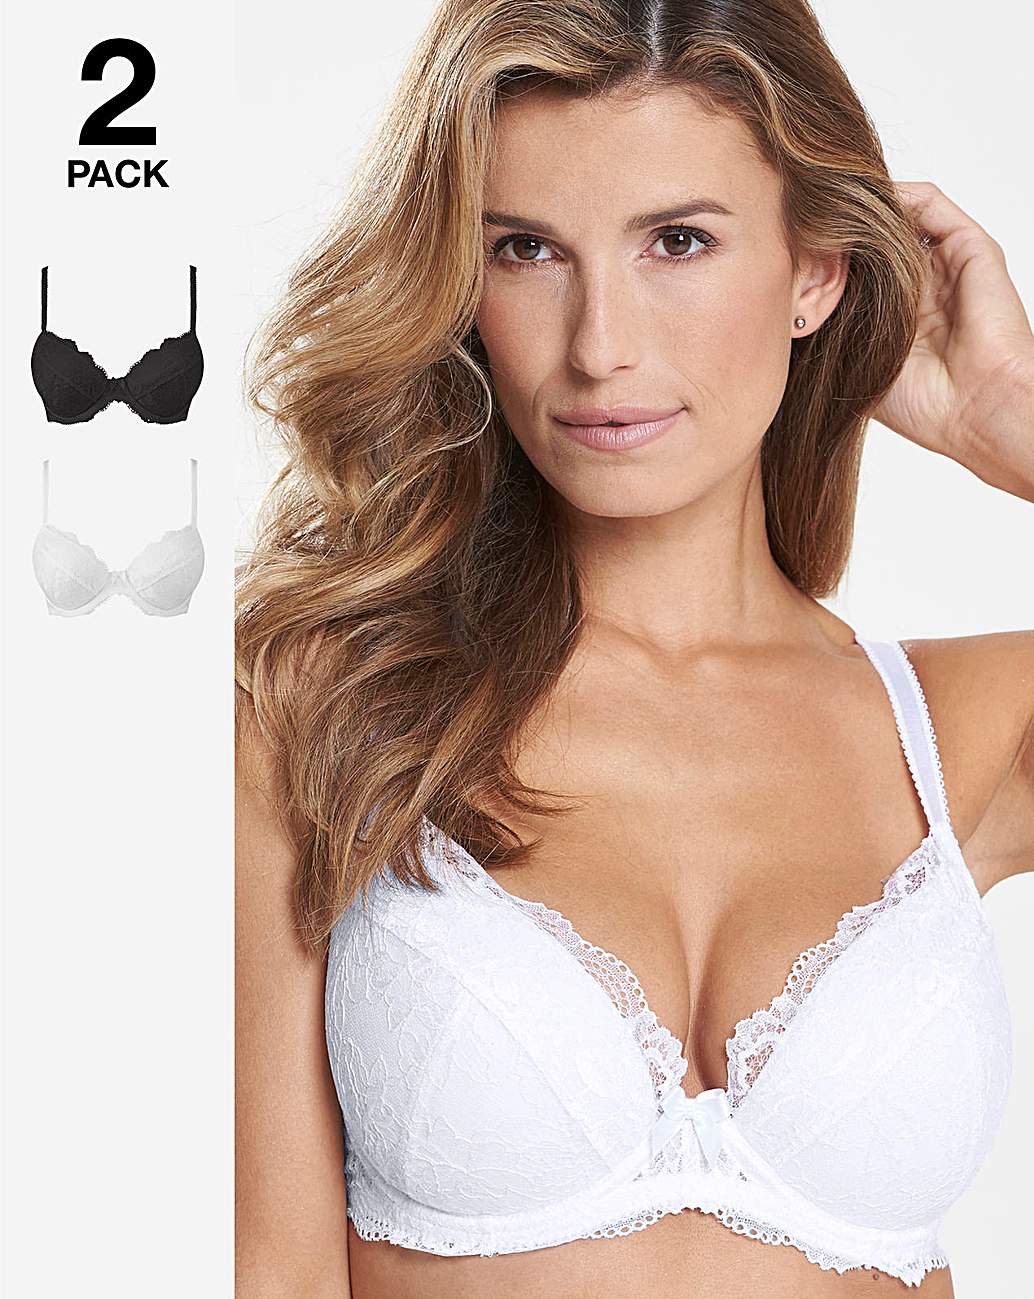 Buy Black/White Push Up Pad Plunge Lace Bras 2 Pack from the Next